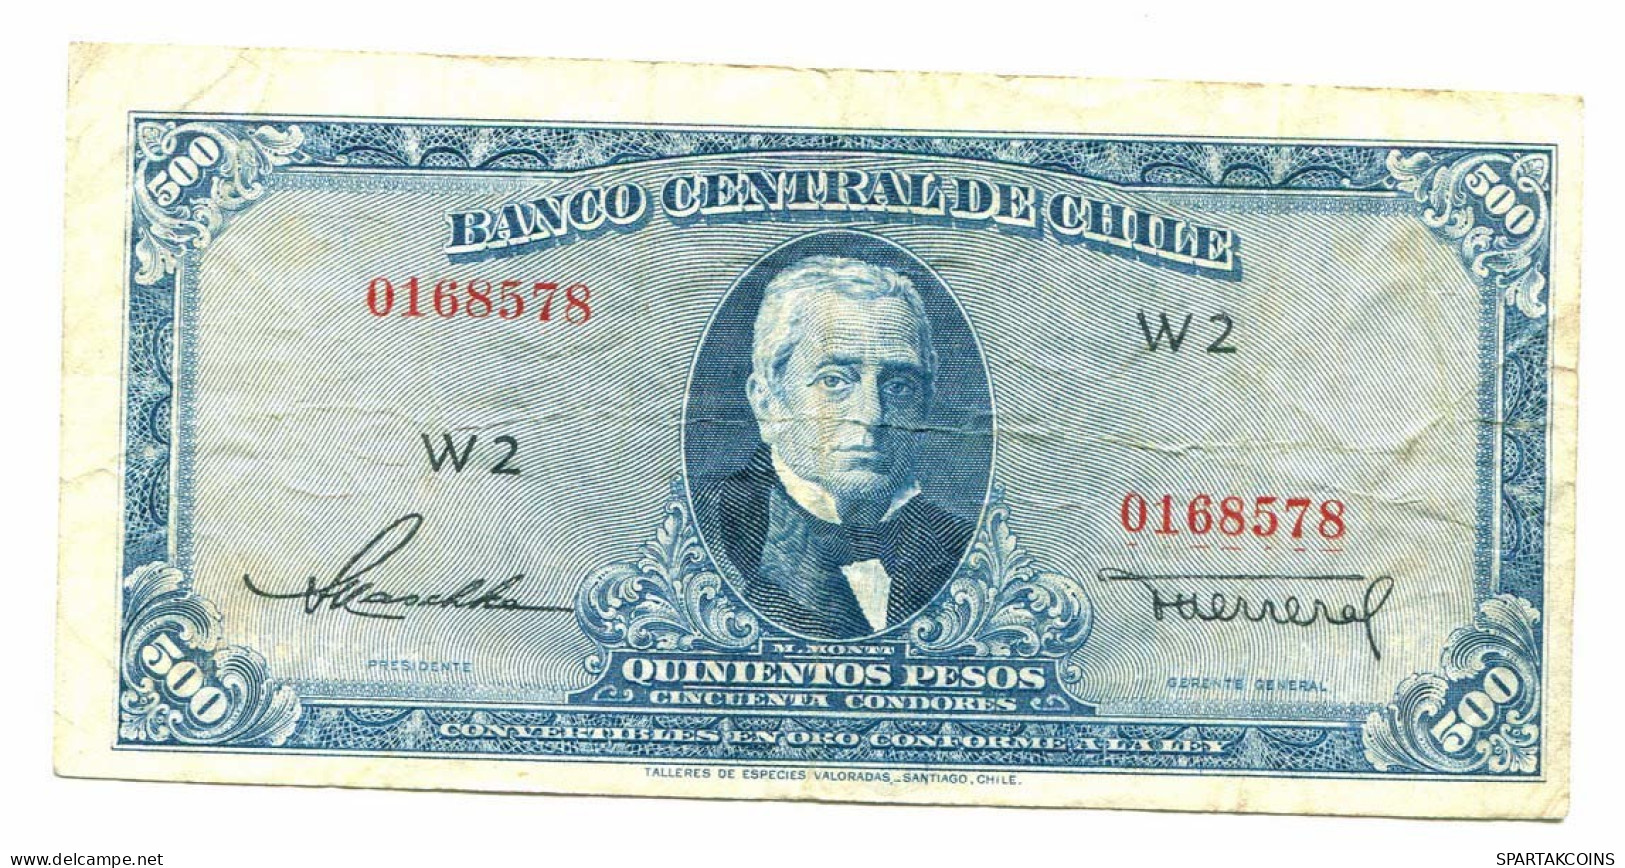 CHILE 500 PESOS 1947-1959 SERIE W 2 P 115 VF-XF Paper Money #P10911.4 - [11] Local Banknote Issues